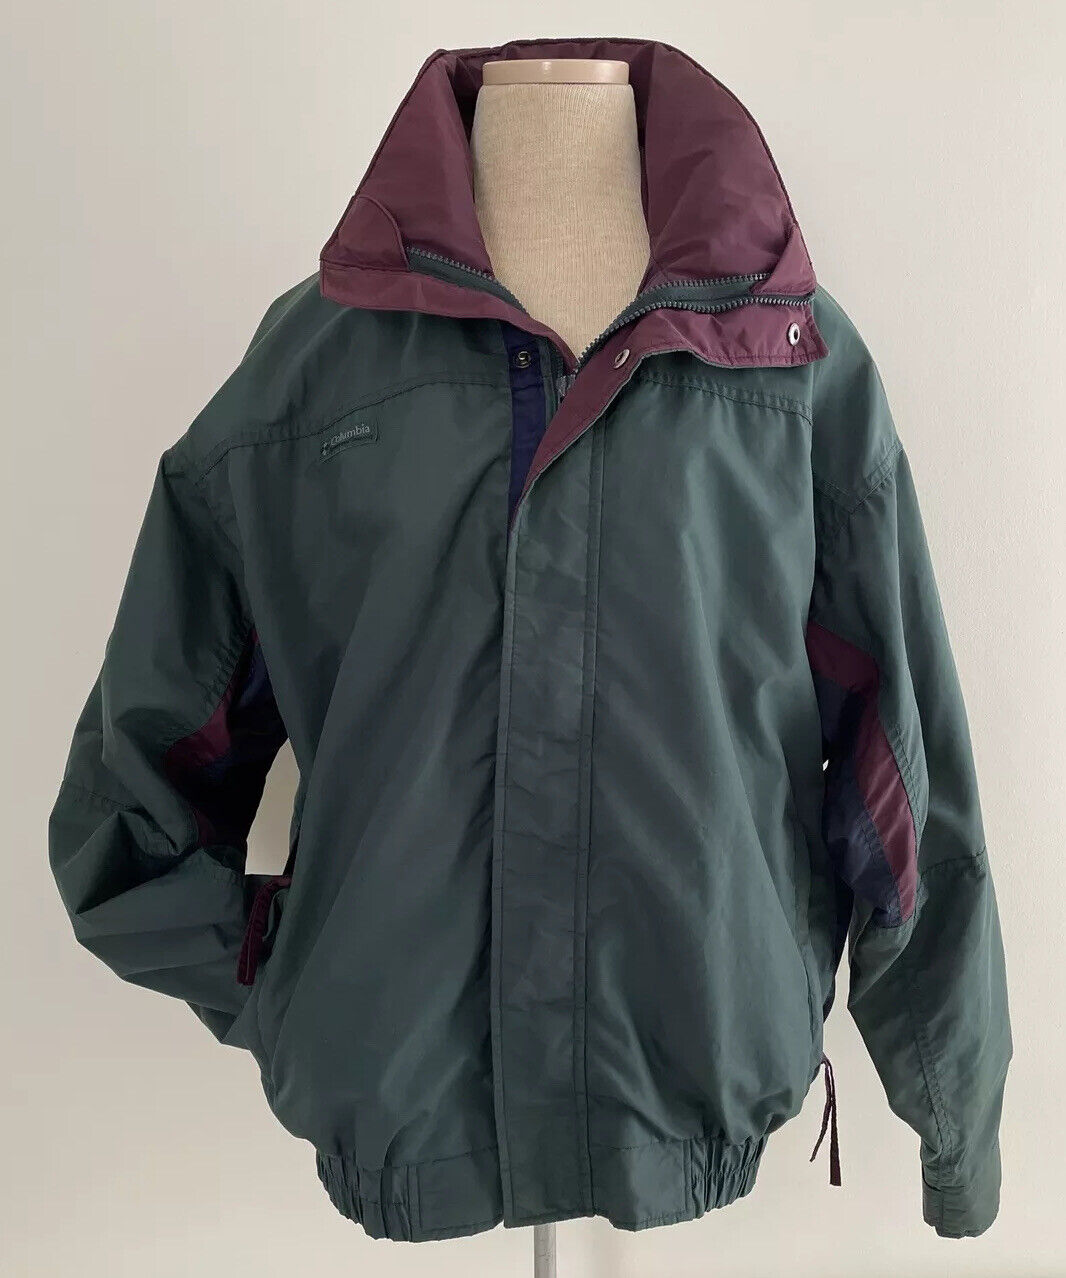 Vintage 80s-90s Columbia Bugaboo 2-In-1 Jacket Green/Maroon/Blue Sz XL  Chest 58”